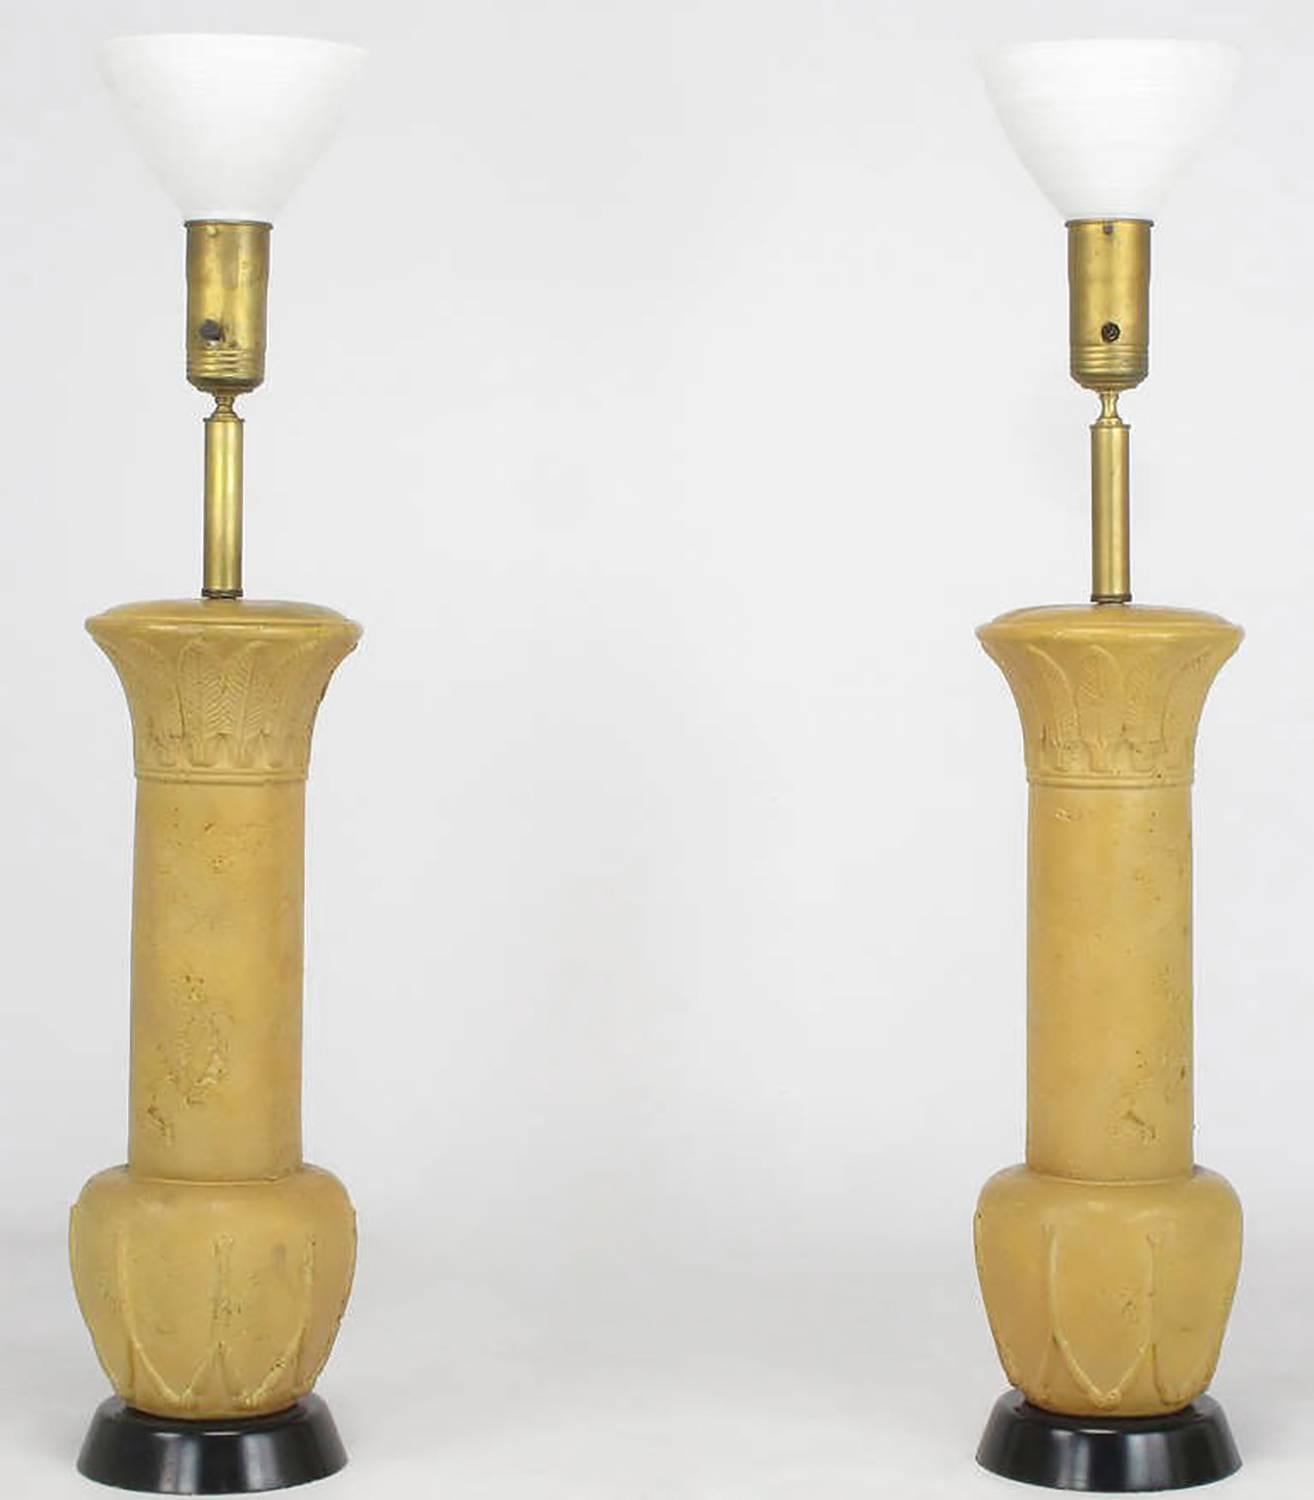 Reminiscent of some Frances Elkins design lamps, this monumental pair have terra cotta glazing over cast plaster, black lacquered plaster bases, brass stems and cups, with white milk glass diffuser. Original shades are woven of bamboo and wool.